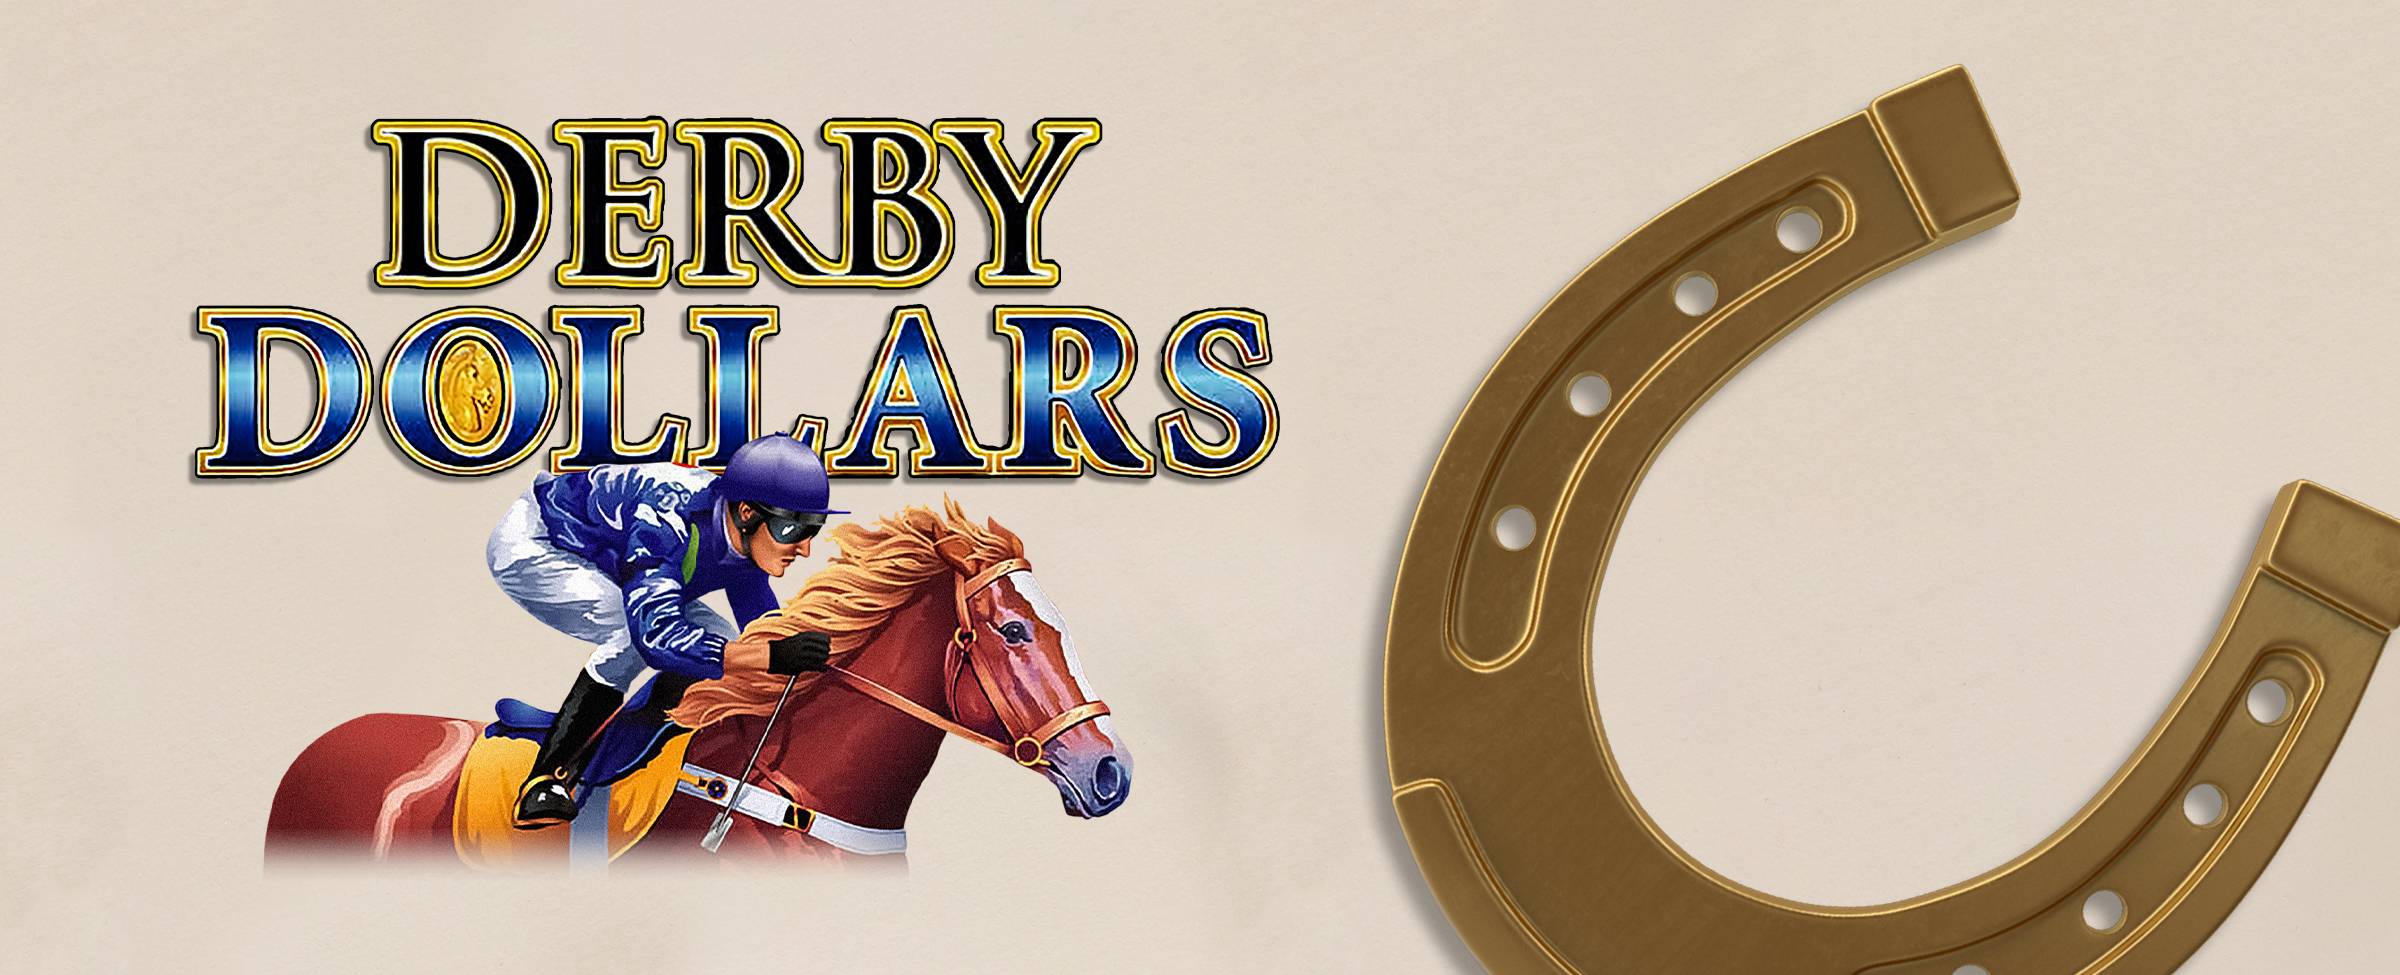 A 3D-animated horse and jockey appear beneath the words “Derby Dollars” - a Cafe Casino slot game. To the right is a gold horseshoe.